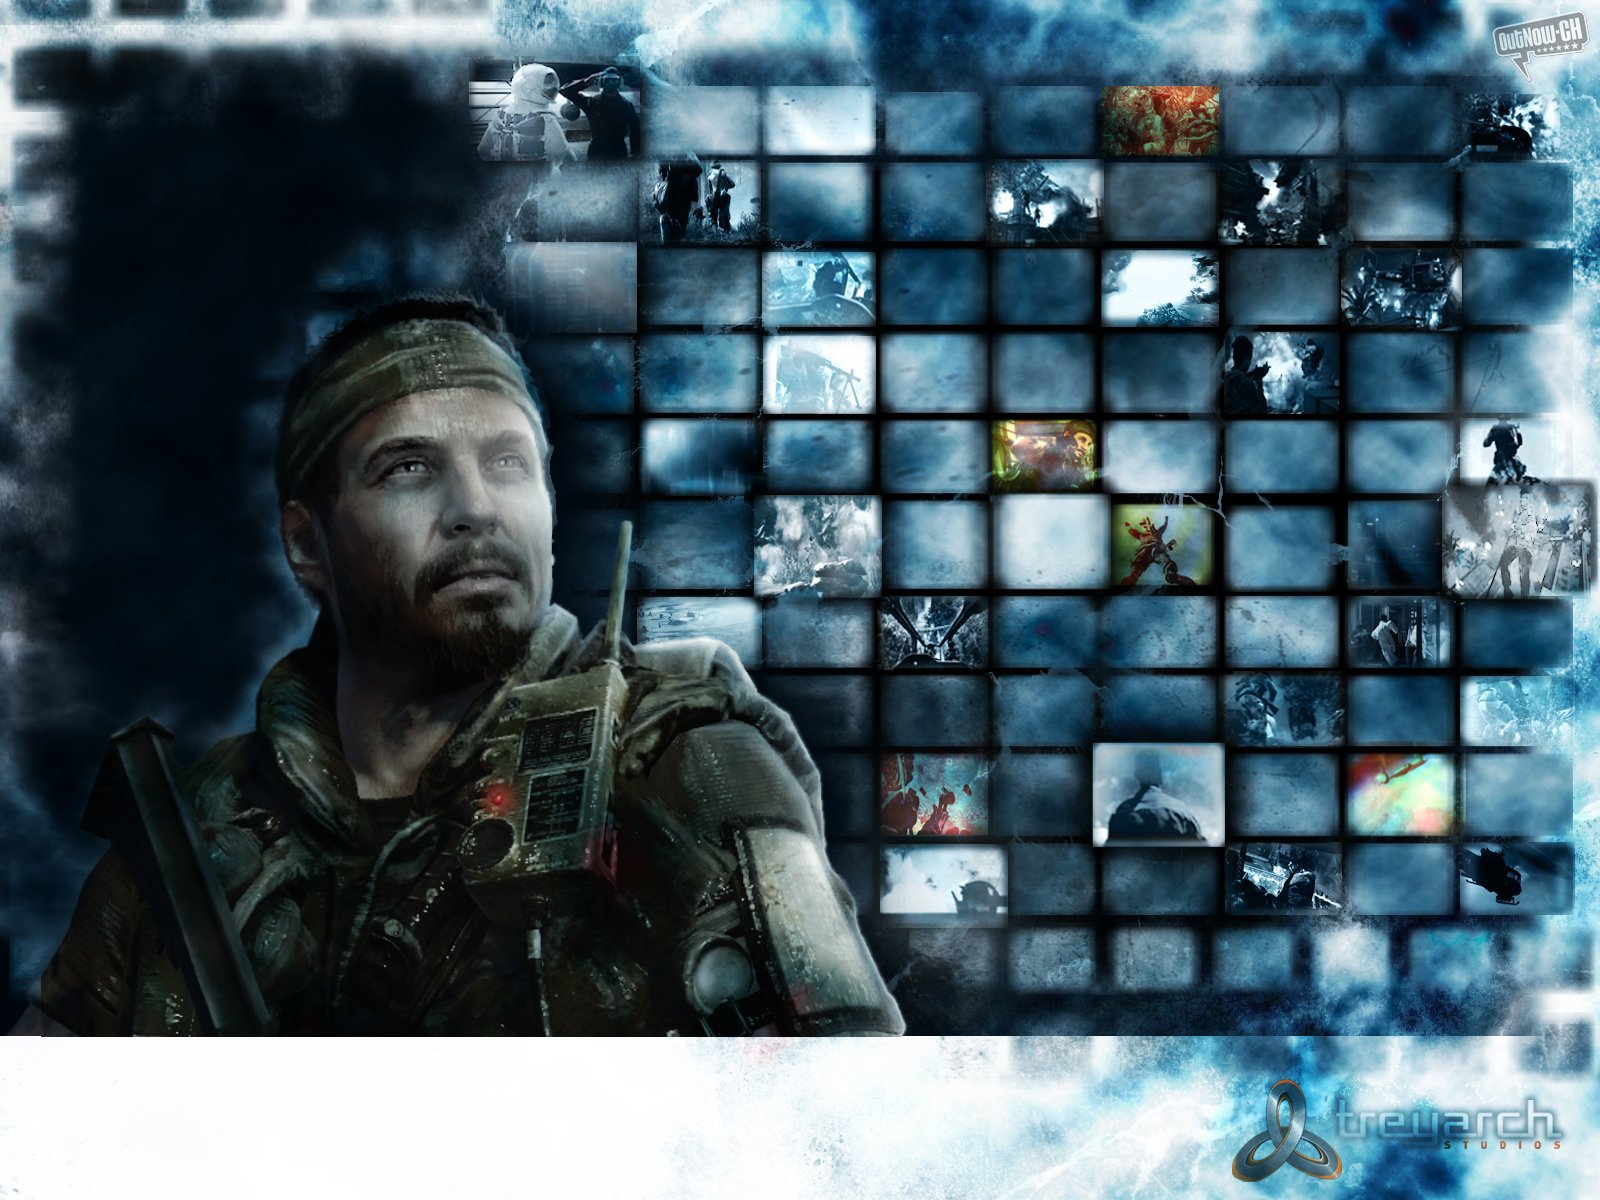  of Duty Black OPS wallpapers Call of Duty Black OPS stock photos